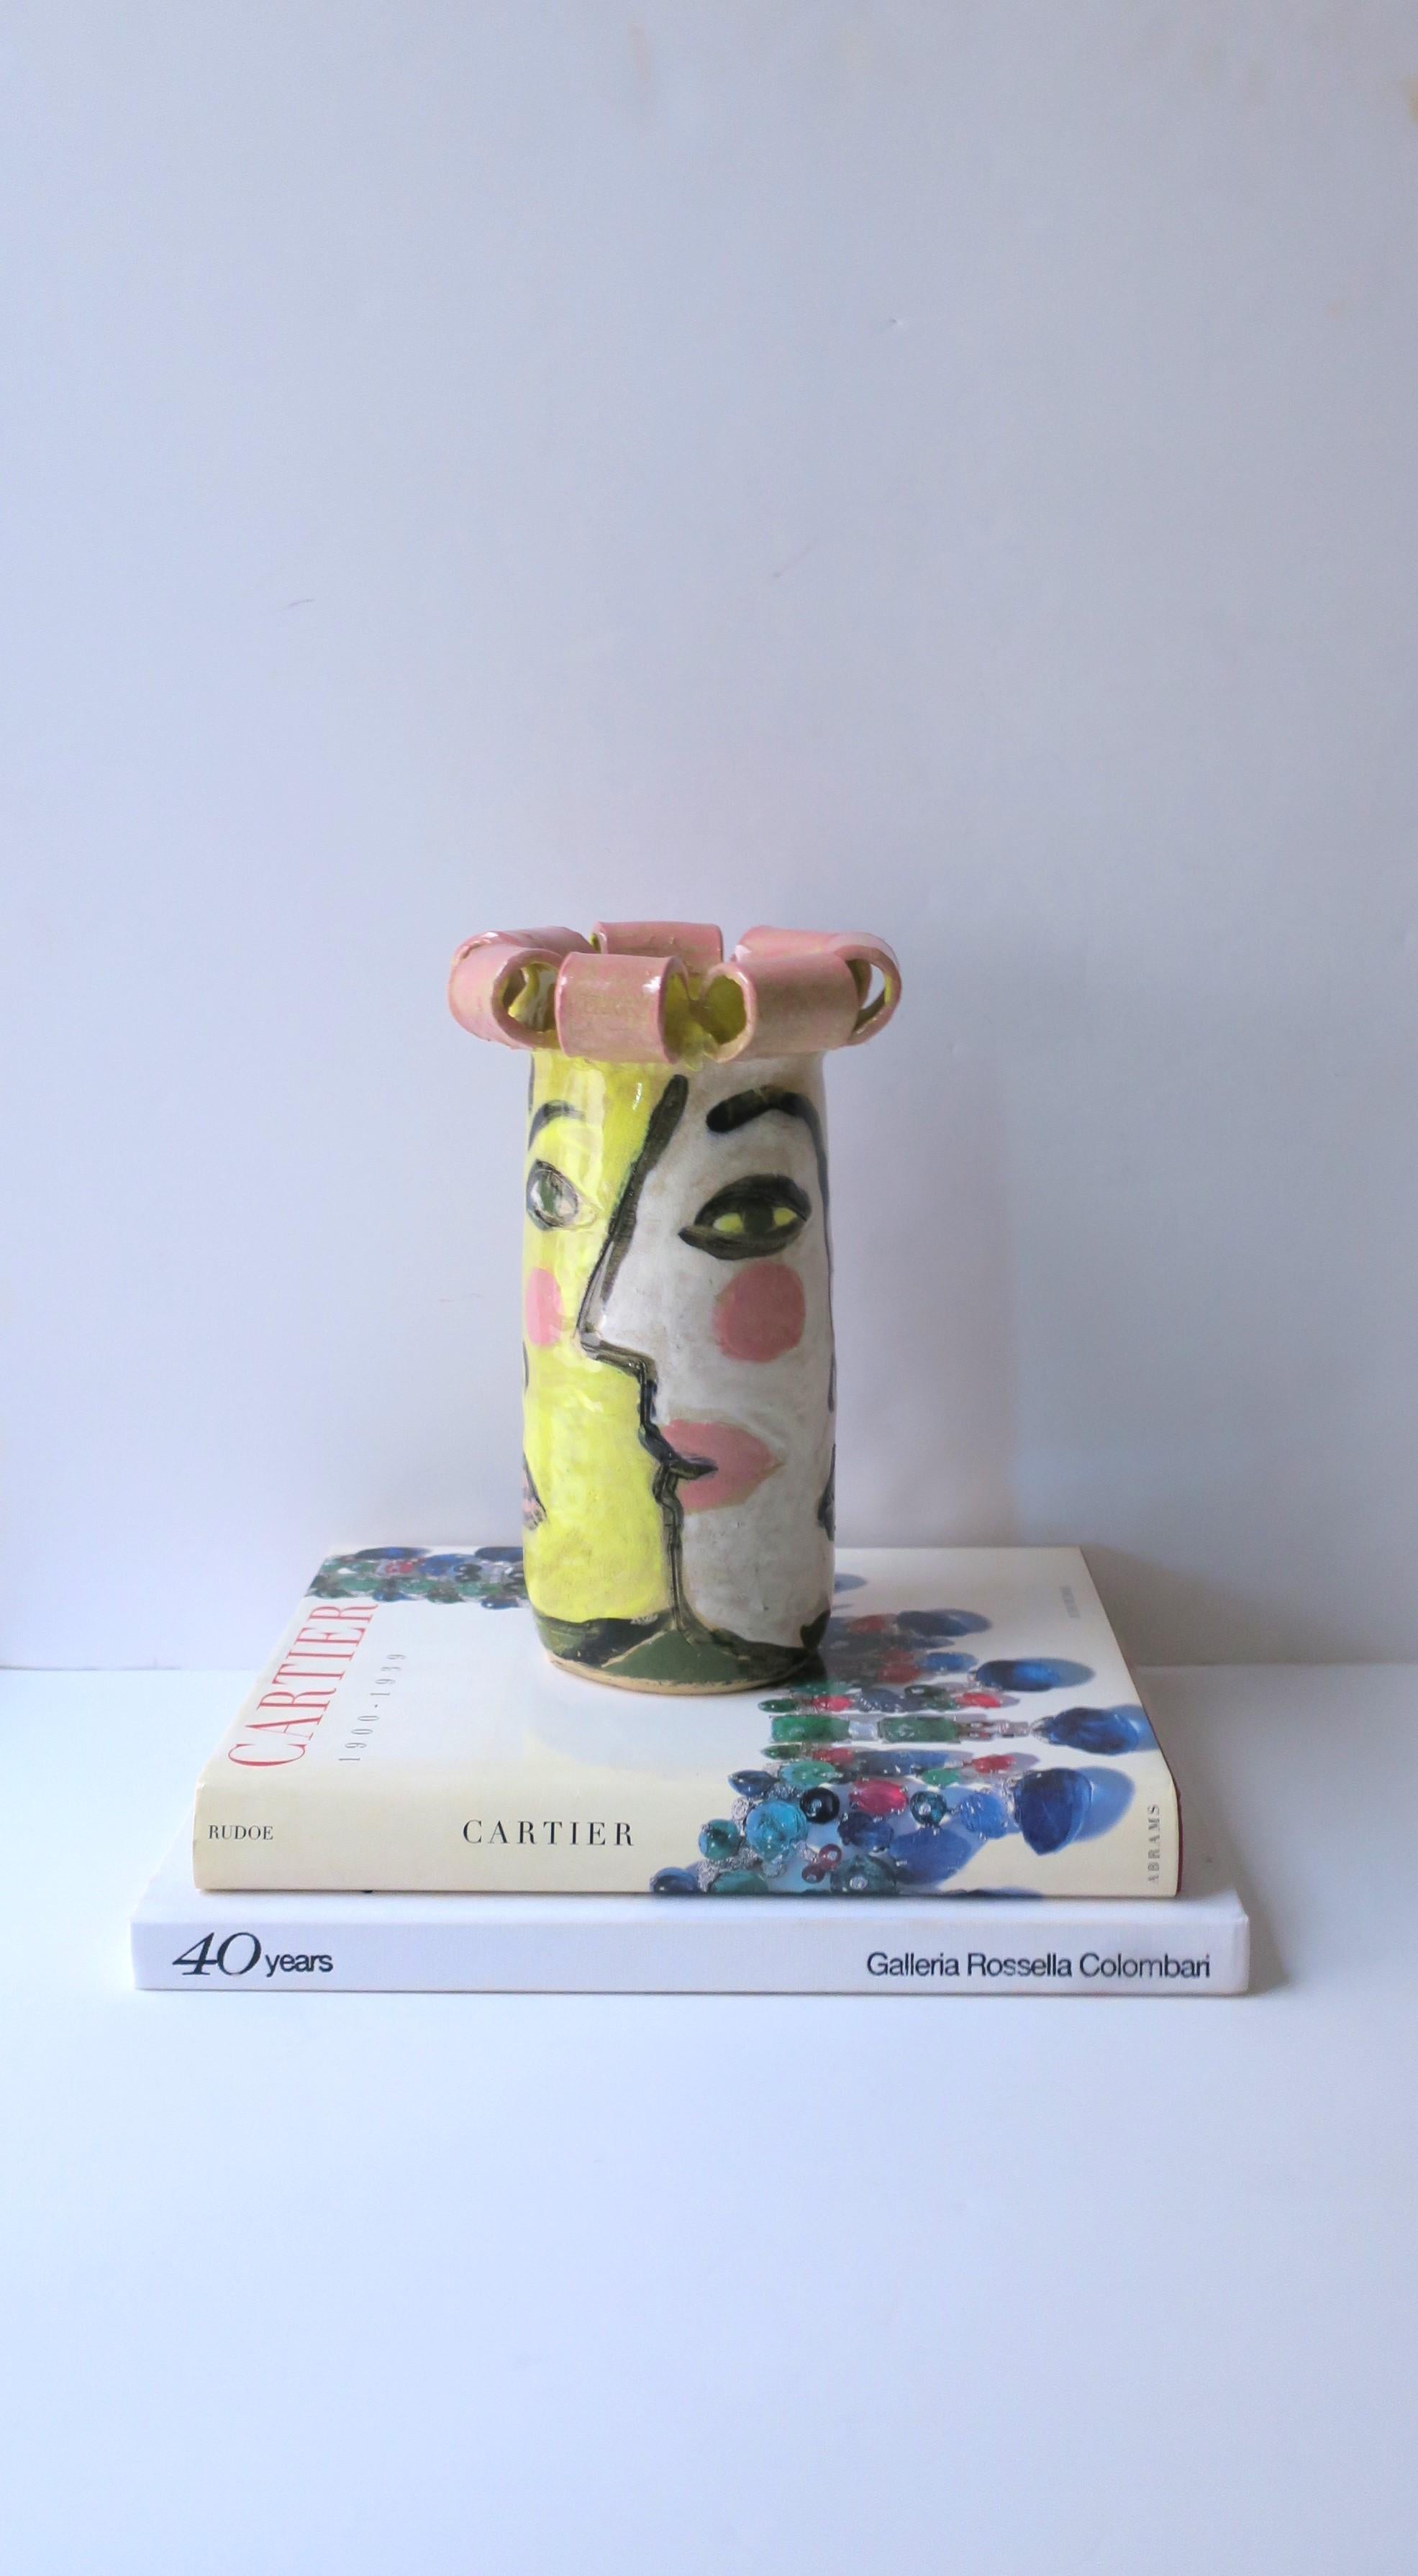 Modern Cubist Face Studio Pottery Sculpture Vase in the Style of Picasso, 1989 For Sale